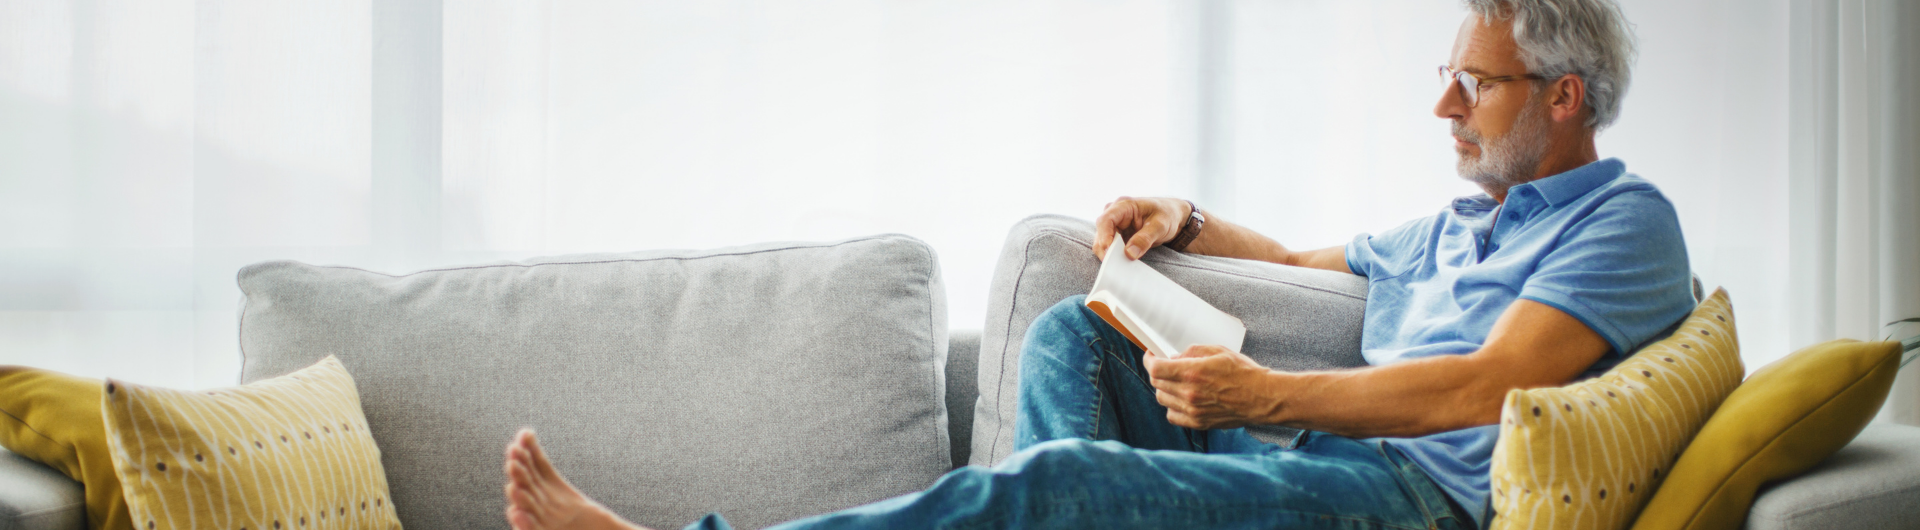 Man sitting on couch reading book